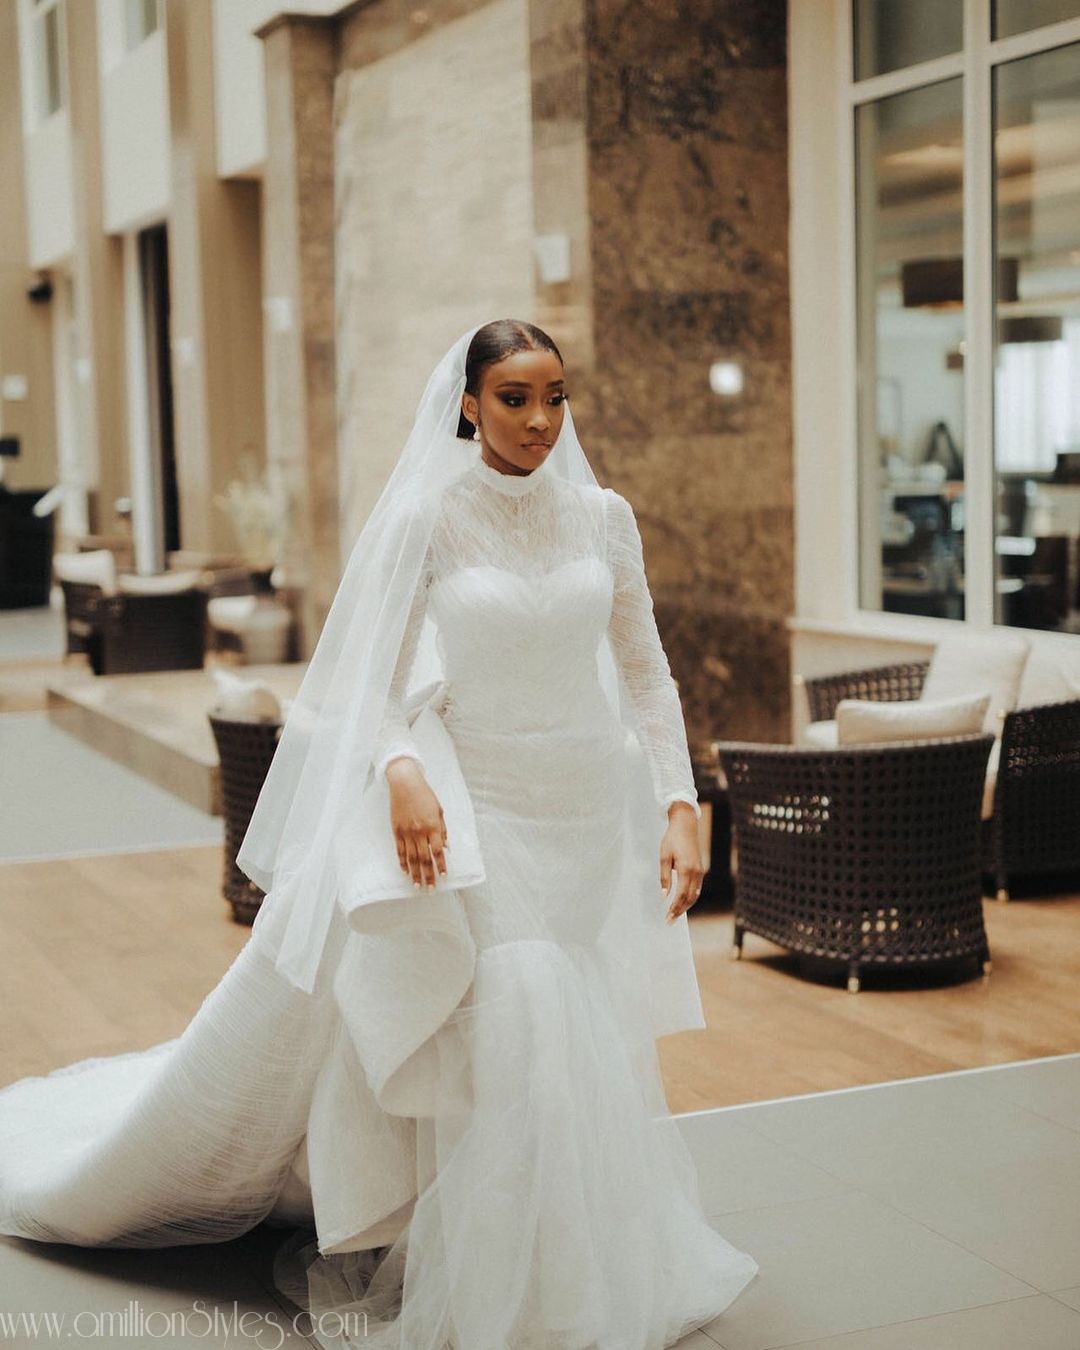 These 10 Stunning Wedding Dresses Will Inspire You Ahead Of Your Wedding Plans